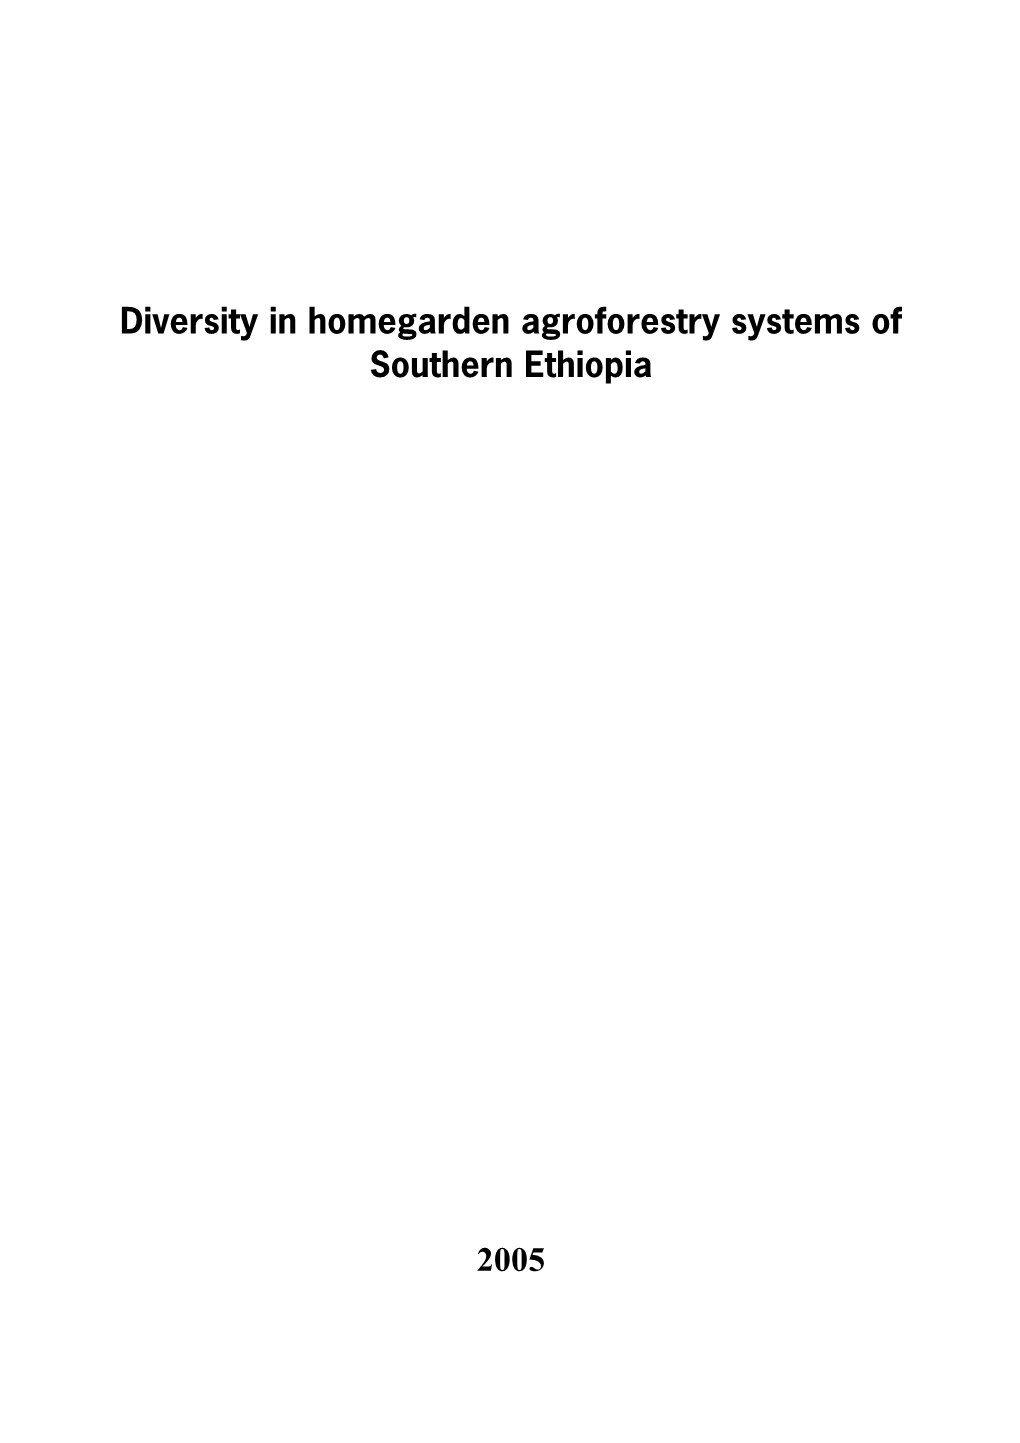 Diversity in Homegarden Agroforestry Systems of Southern Ethiopia